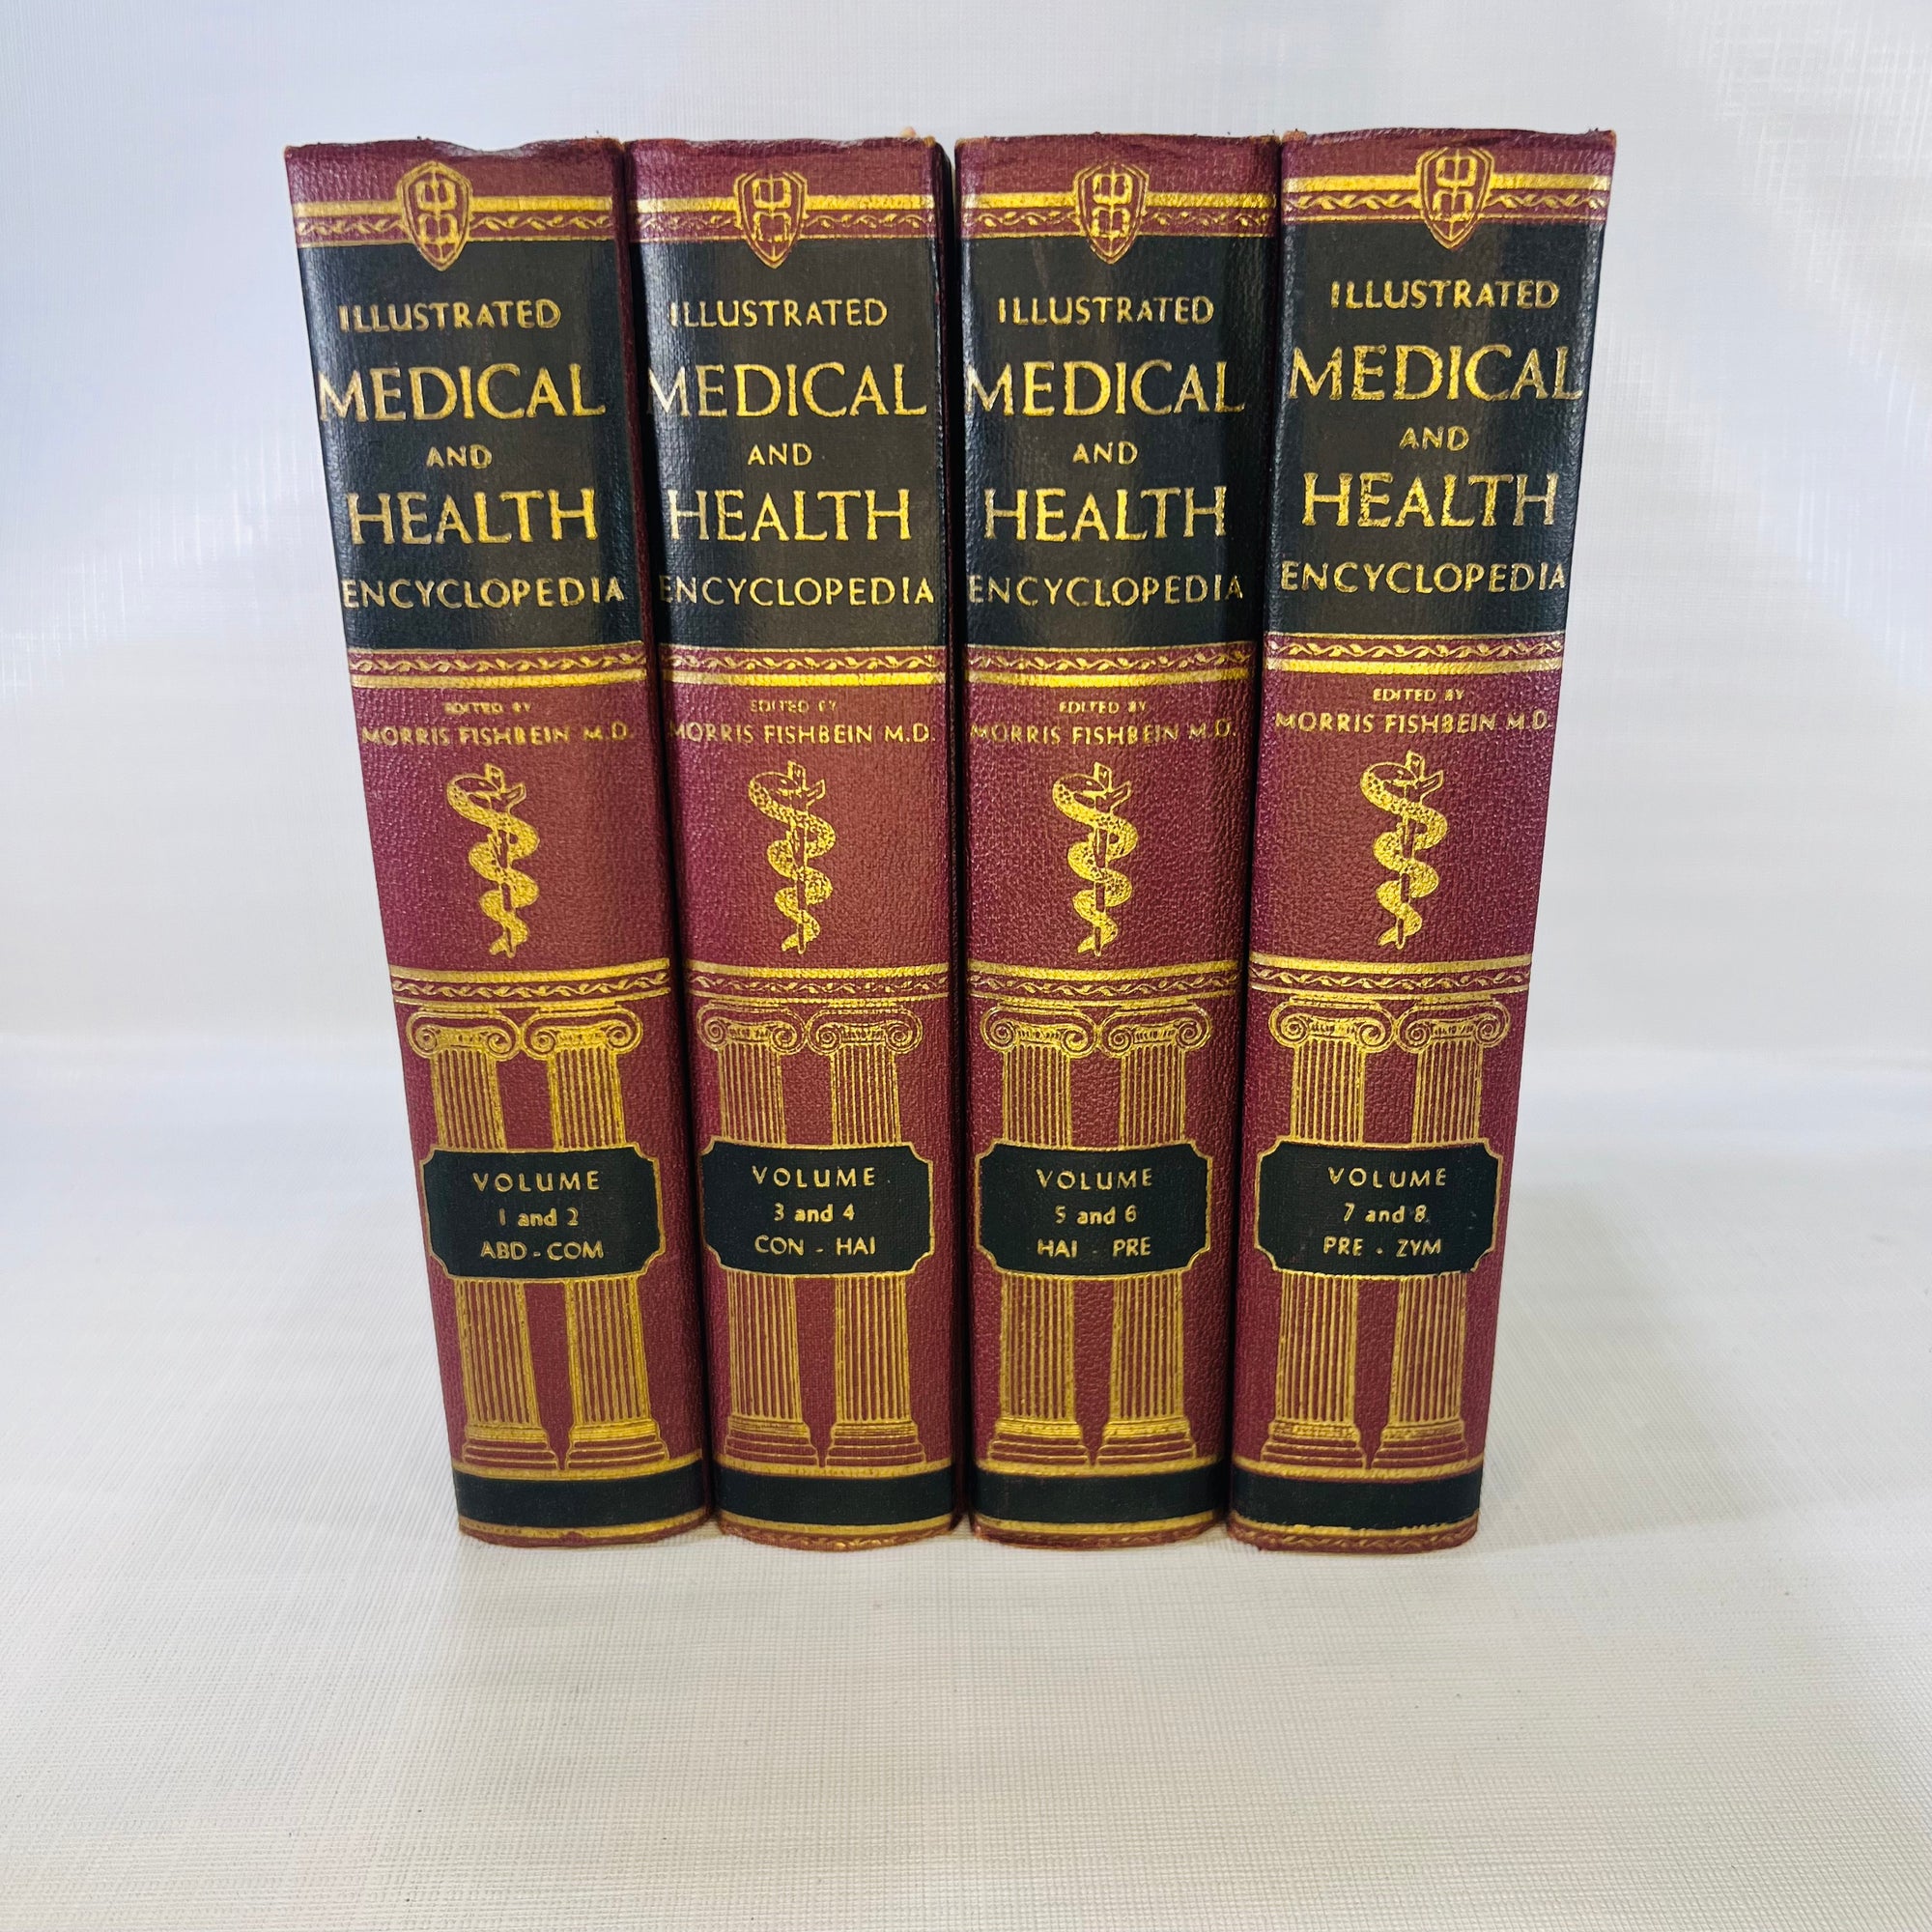 Illustrated Medical and Health Encyclopedia 4 Volume Set edited by Morris Fishbein M.D. 1959 Double Day & Co. Inc